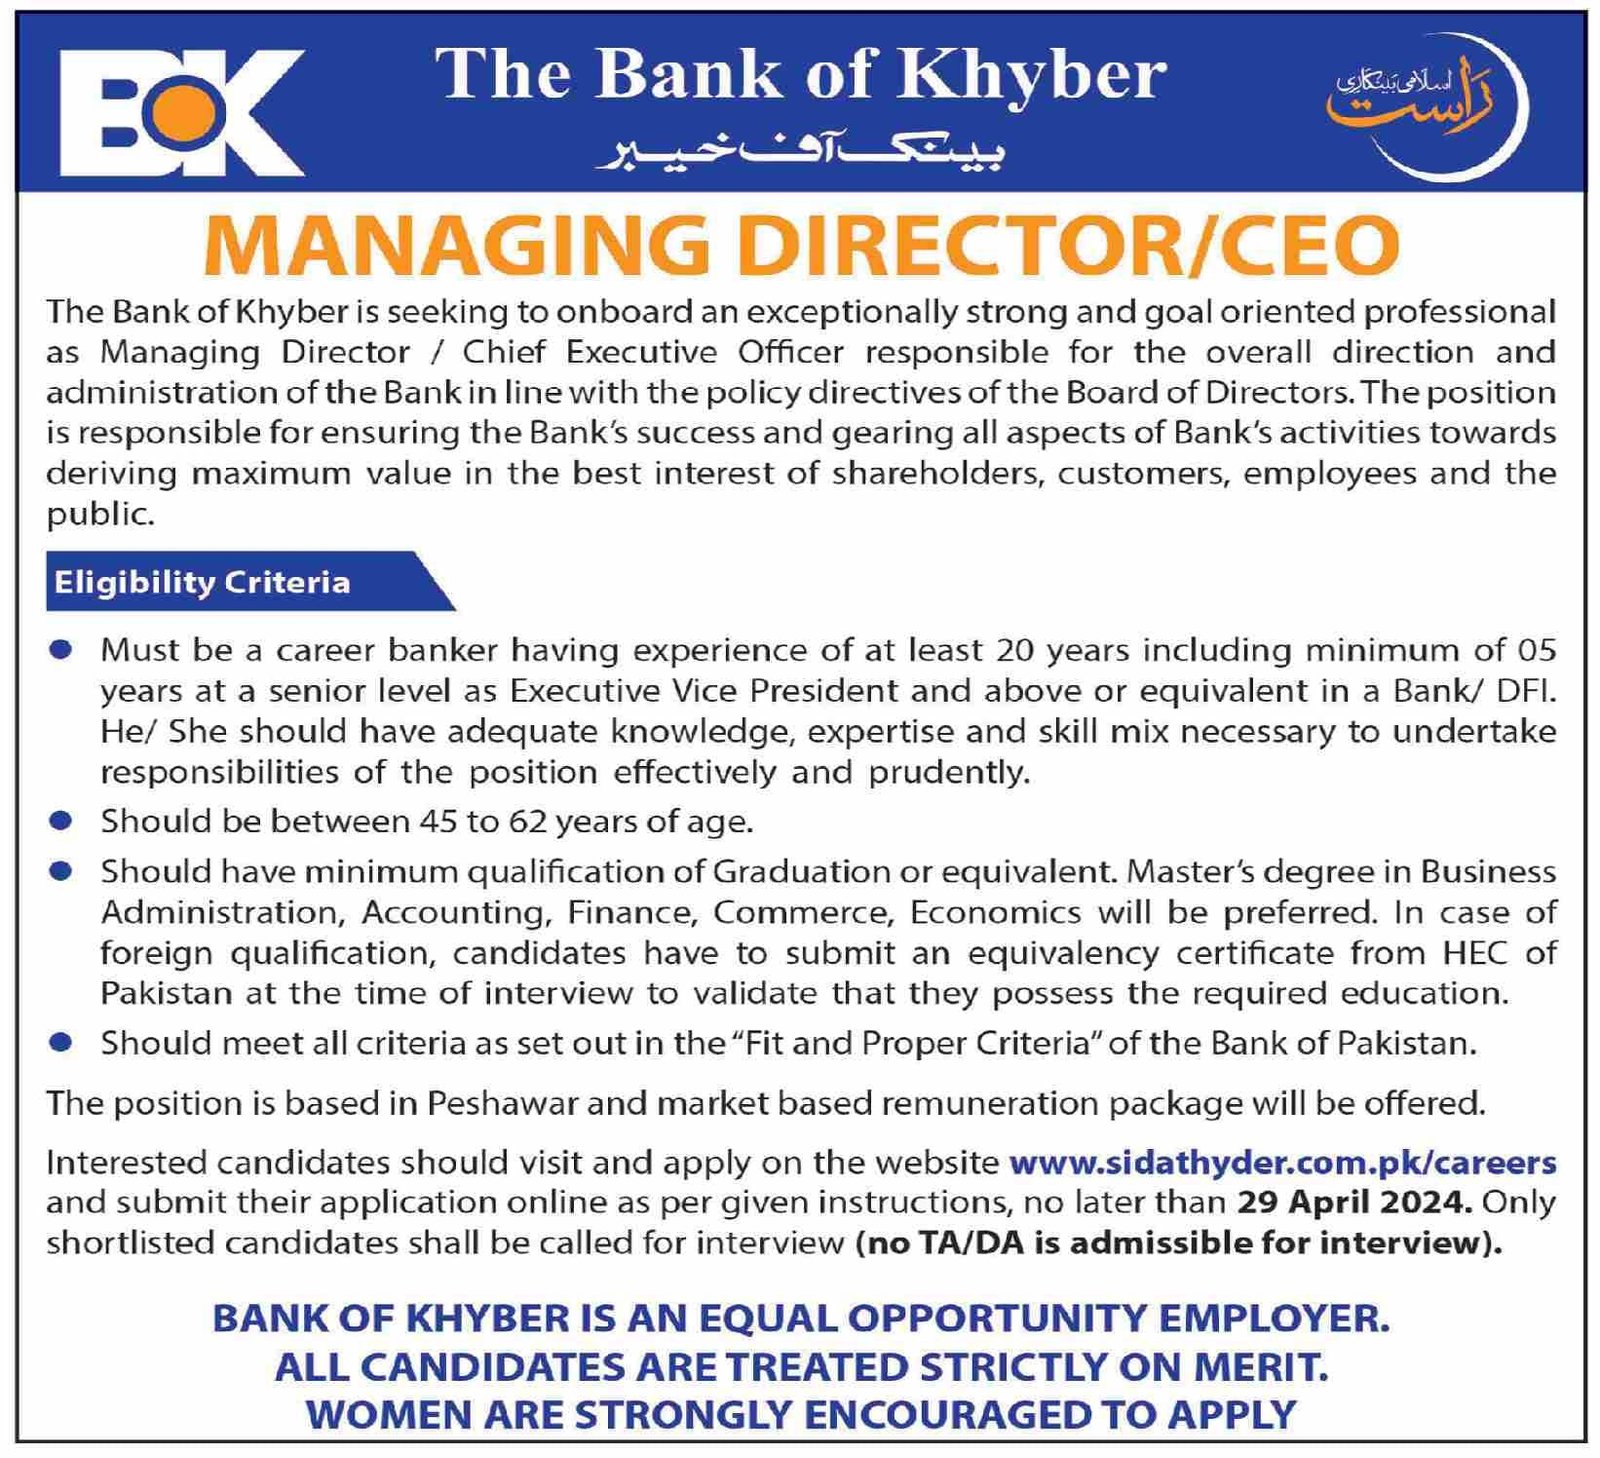 Job advertisement for Managing Director/CEO position at Bank of Khyber